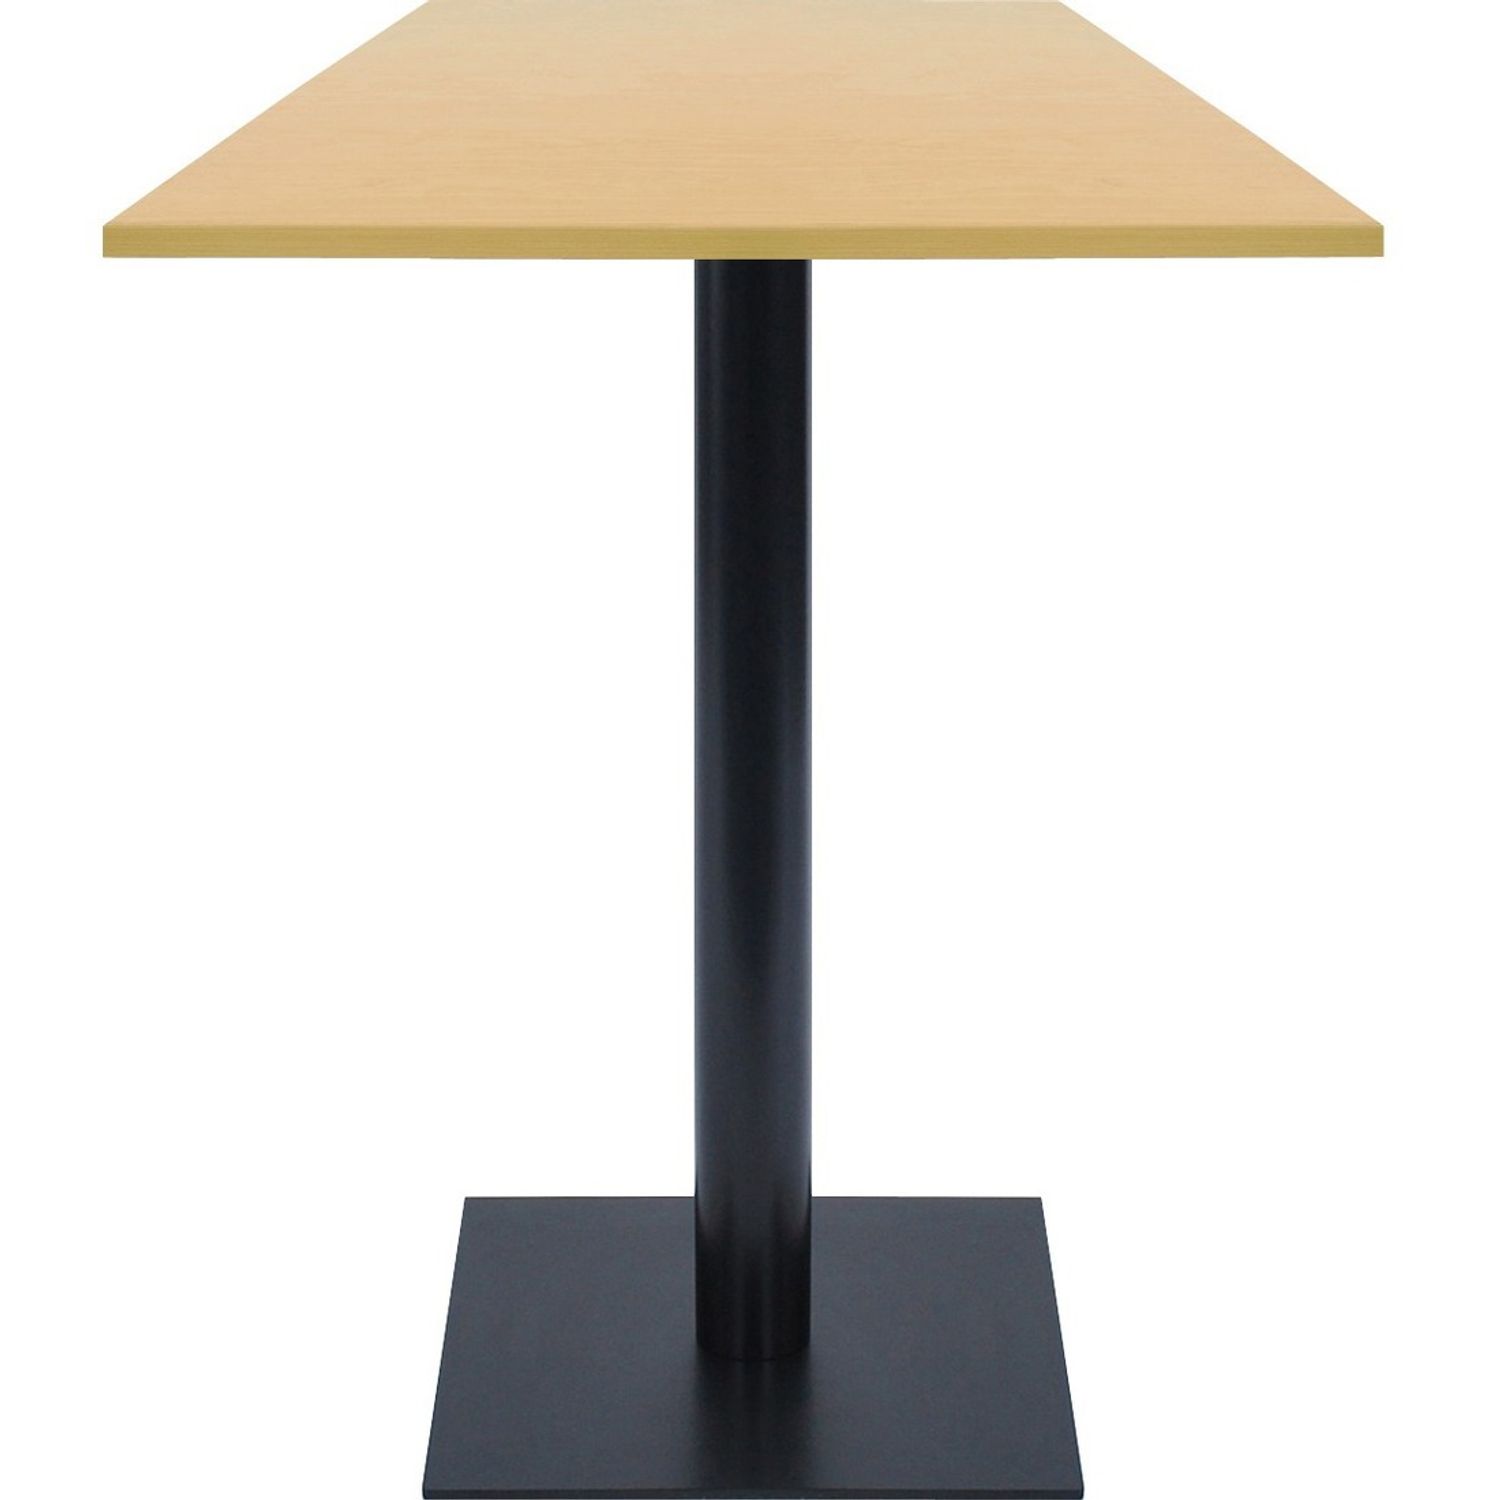 Sienna Hospitality Table High Pressure Laminate (HPL) Square Top, Powder Coated Base, 36" Table Top Length x 36" Table Top Width x 1.13" Table Top Depth, 29" Height, Assembly Required